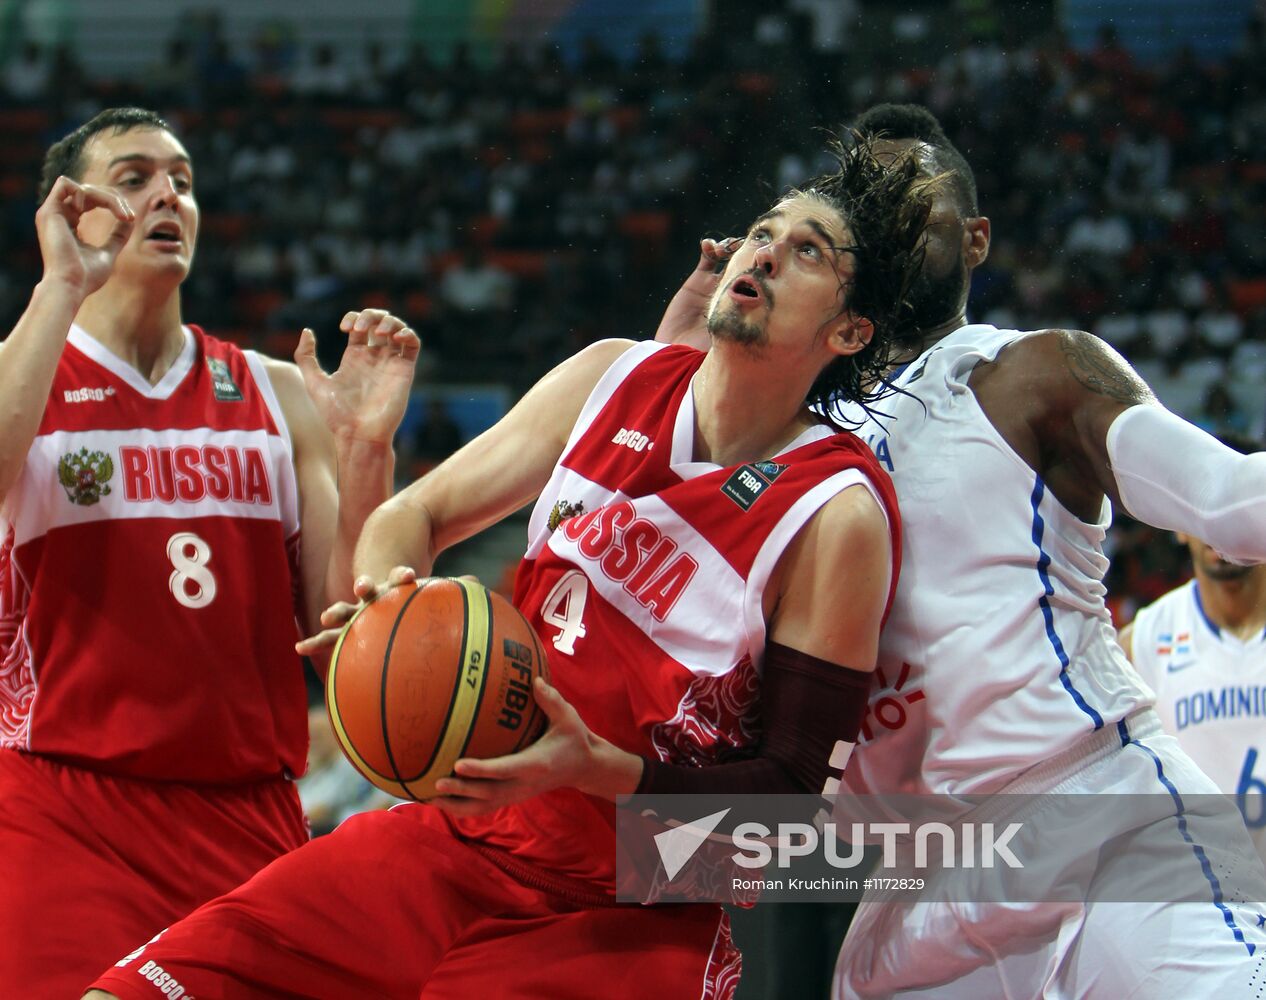 2012 Olympic games qualifiers. Russia vs. Dominican Republic